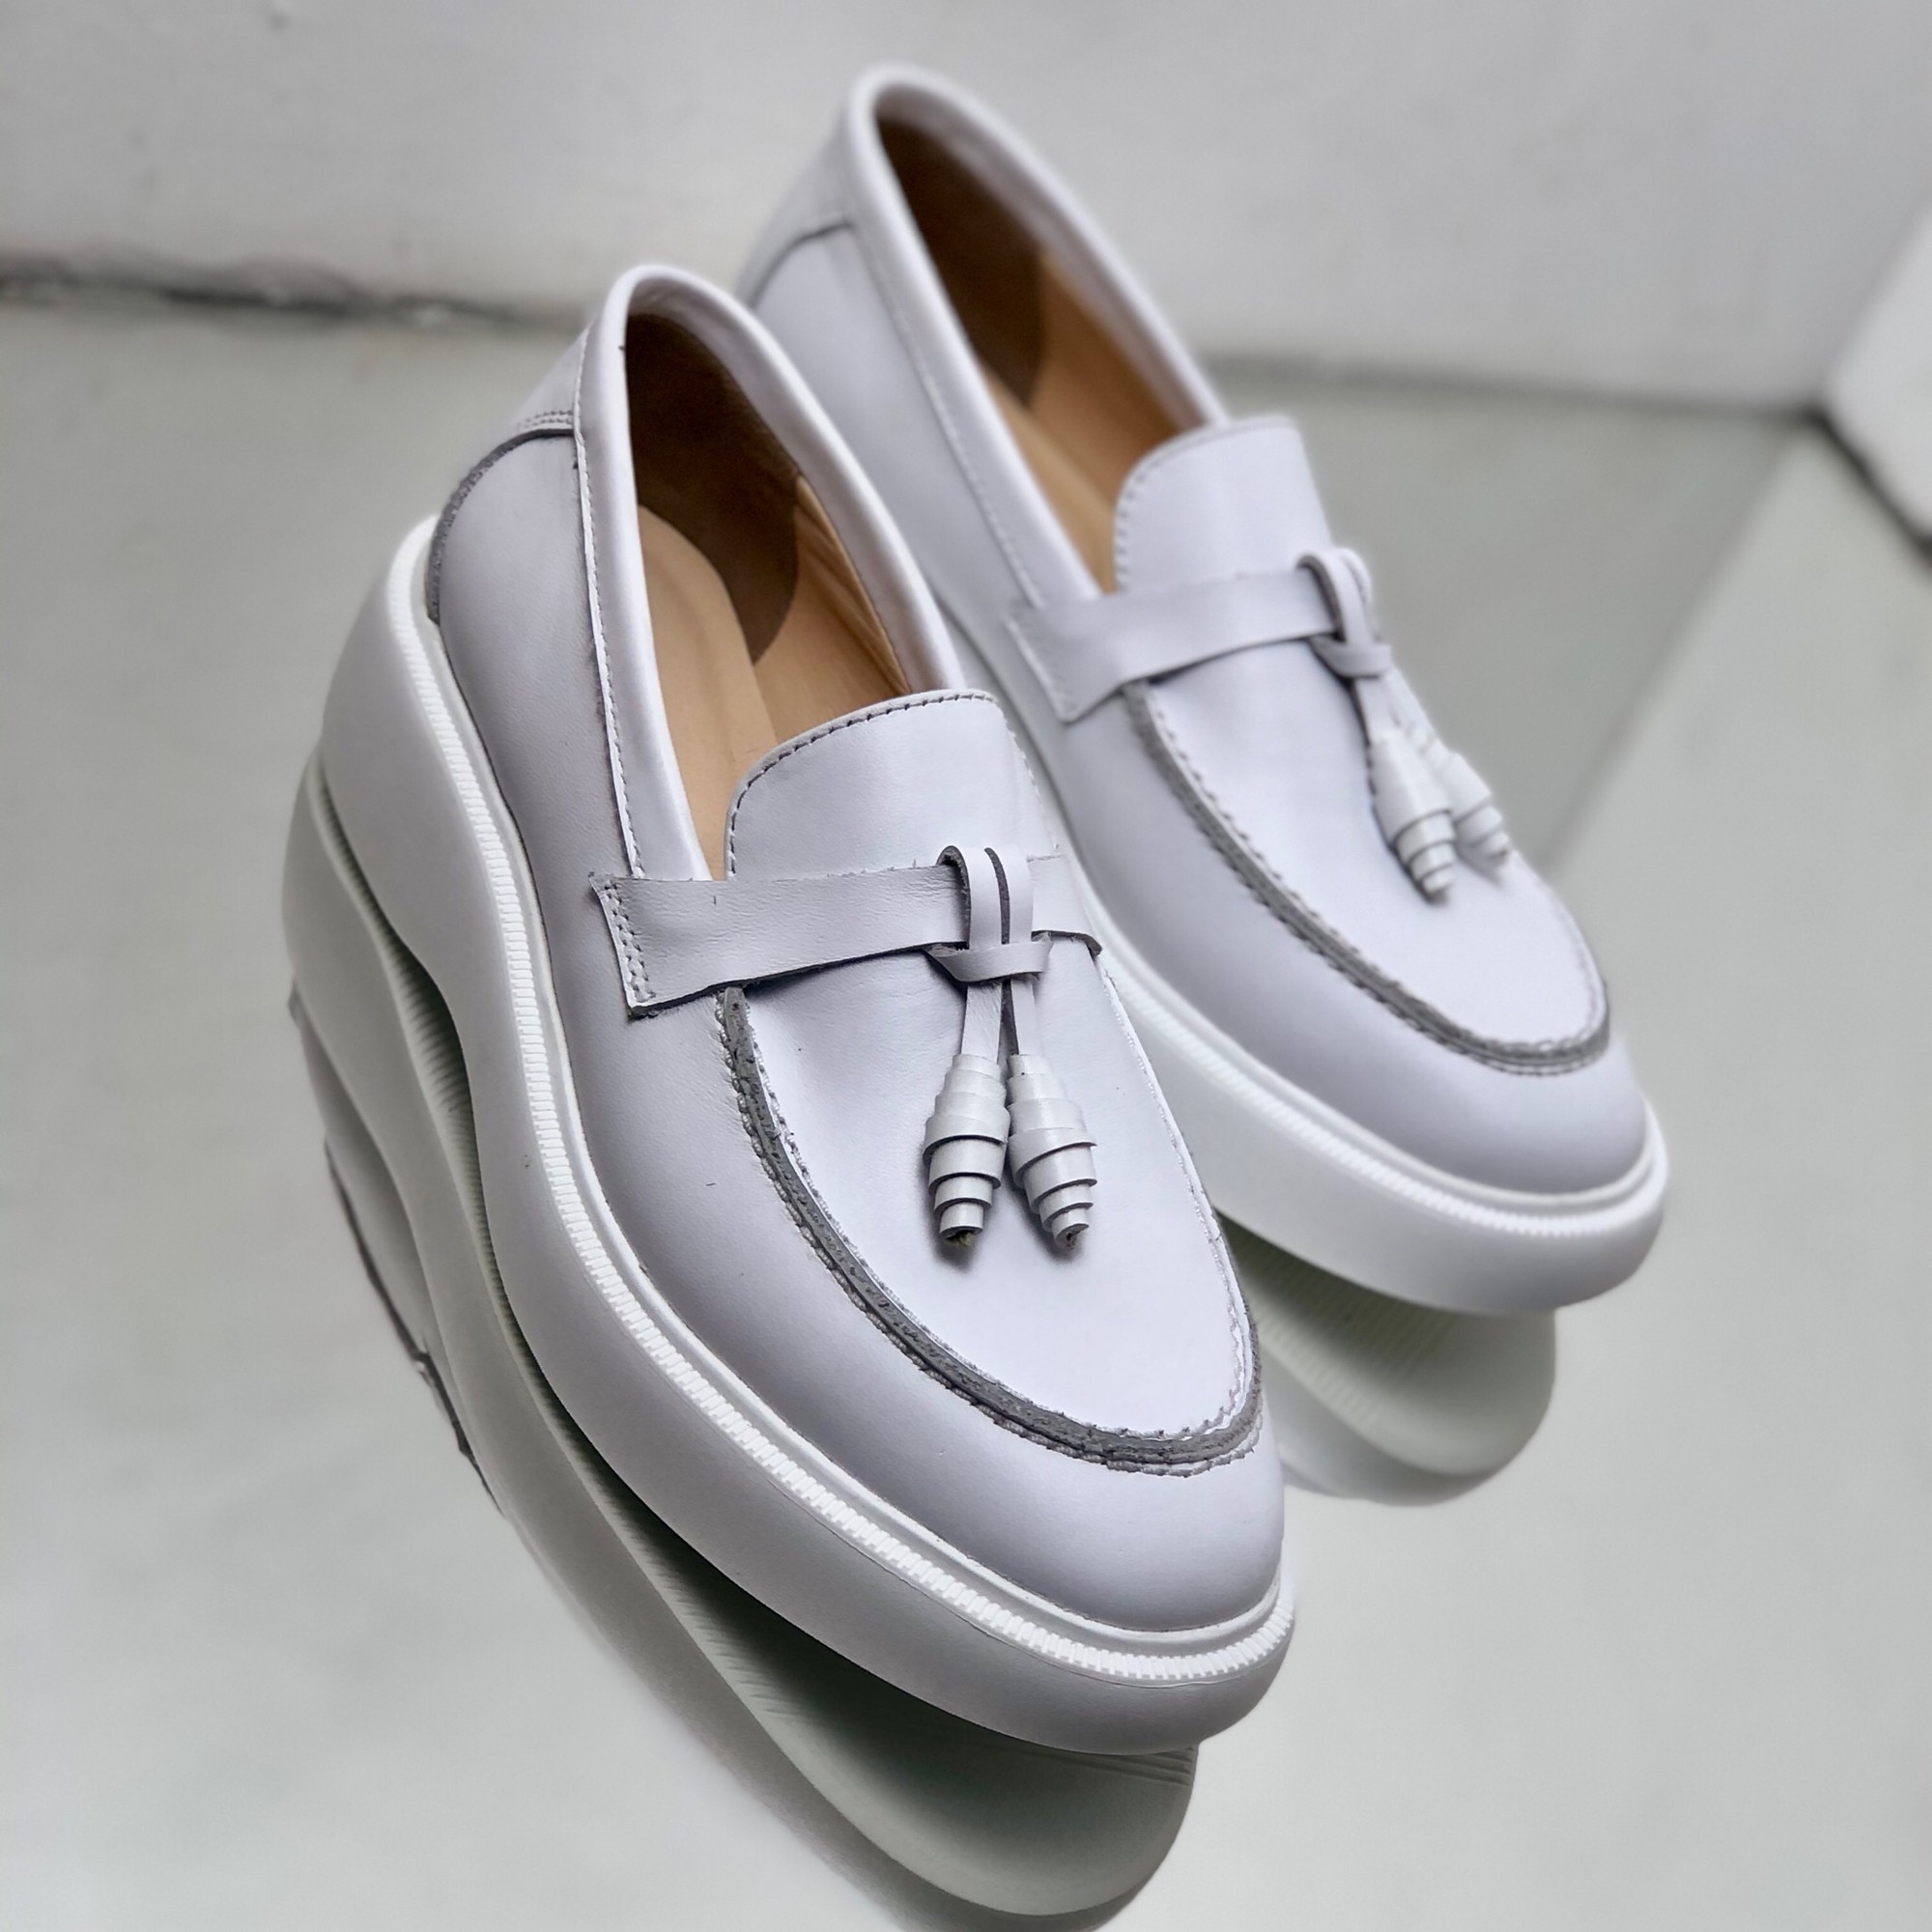 Loafers made of white leather with small decoration